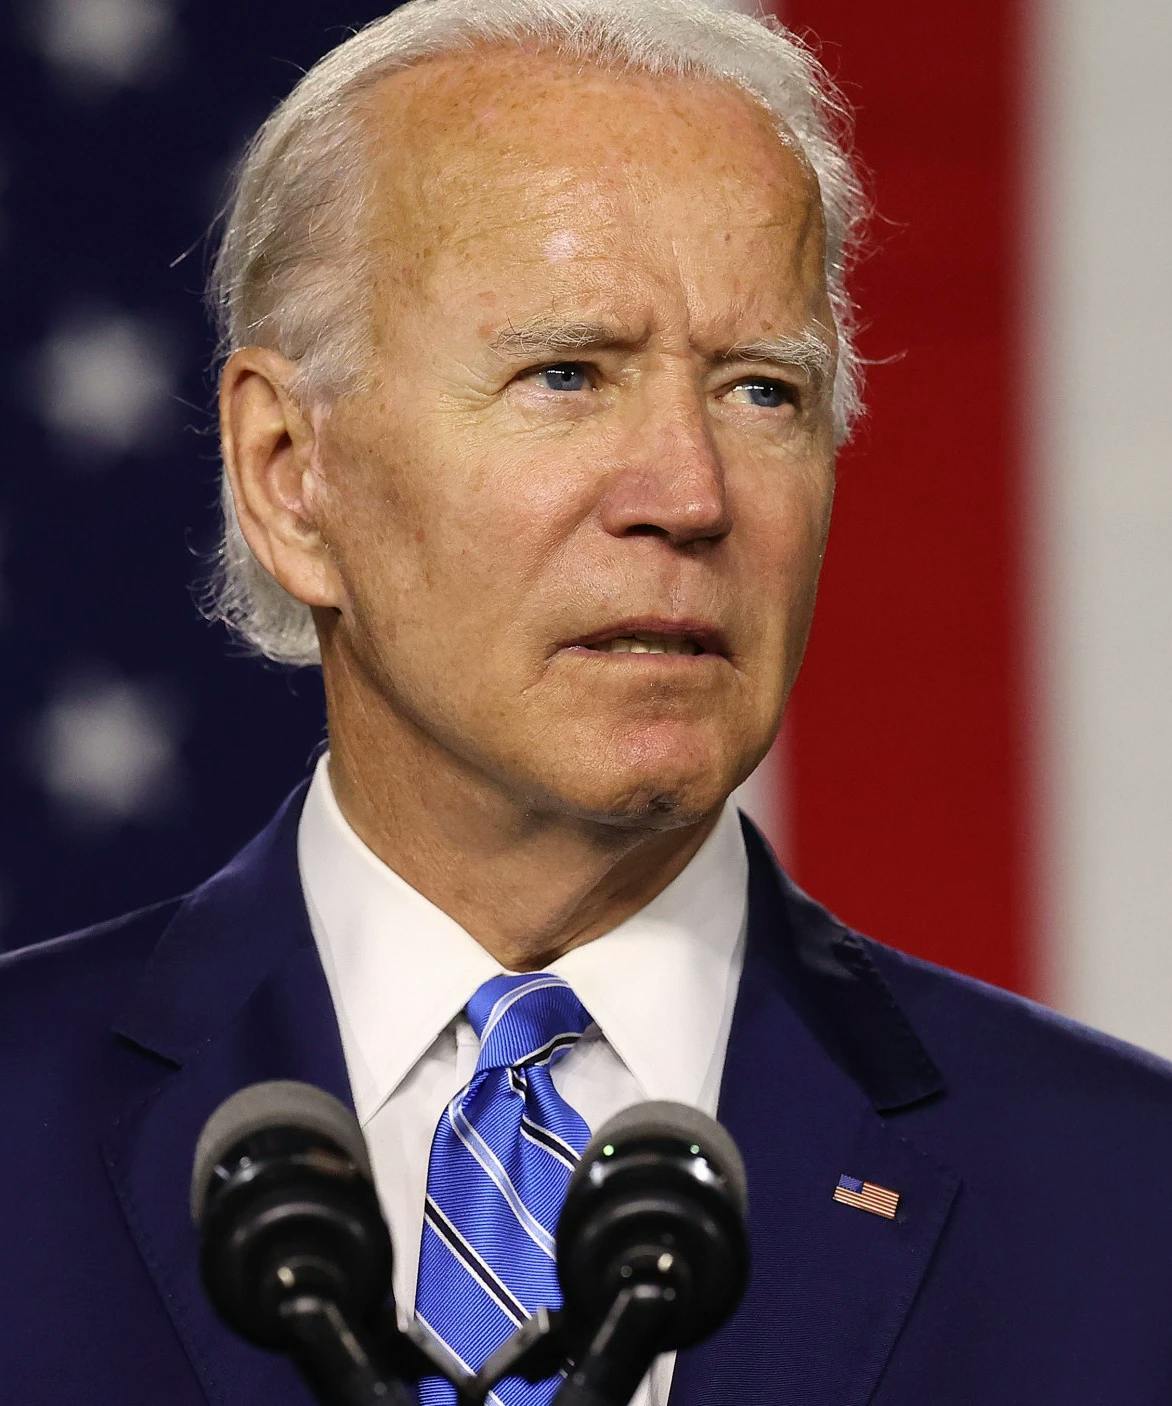 Mainstream Media Admits It Will Report On Biden’s Administration Differently